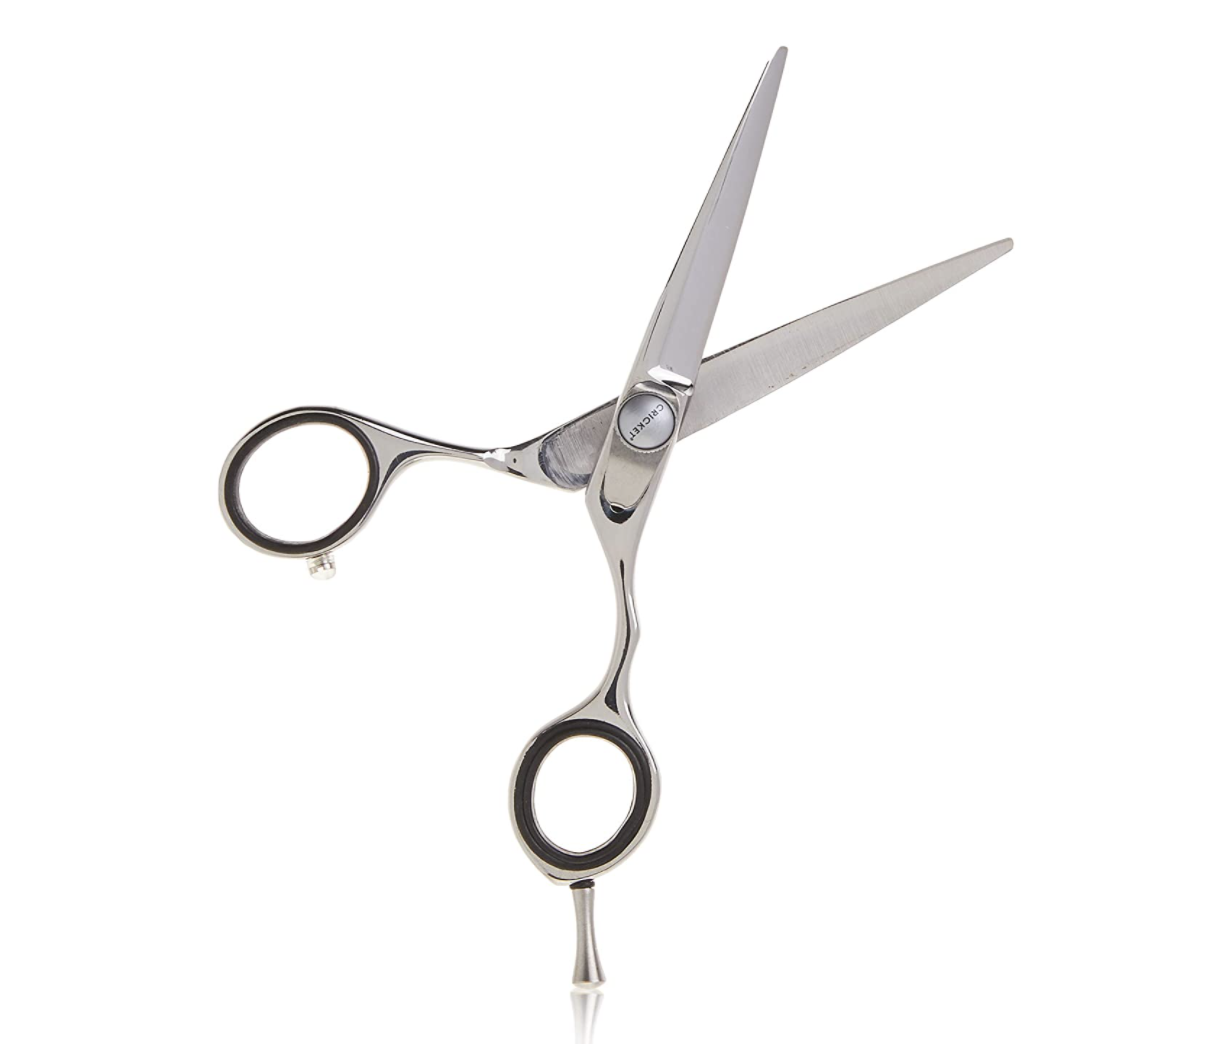 S-2 550 Professional Offset Hair Shear (5.5-Inch)